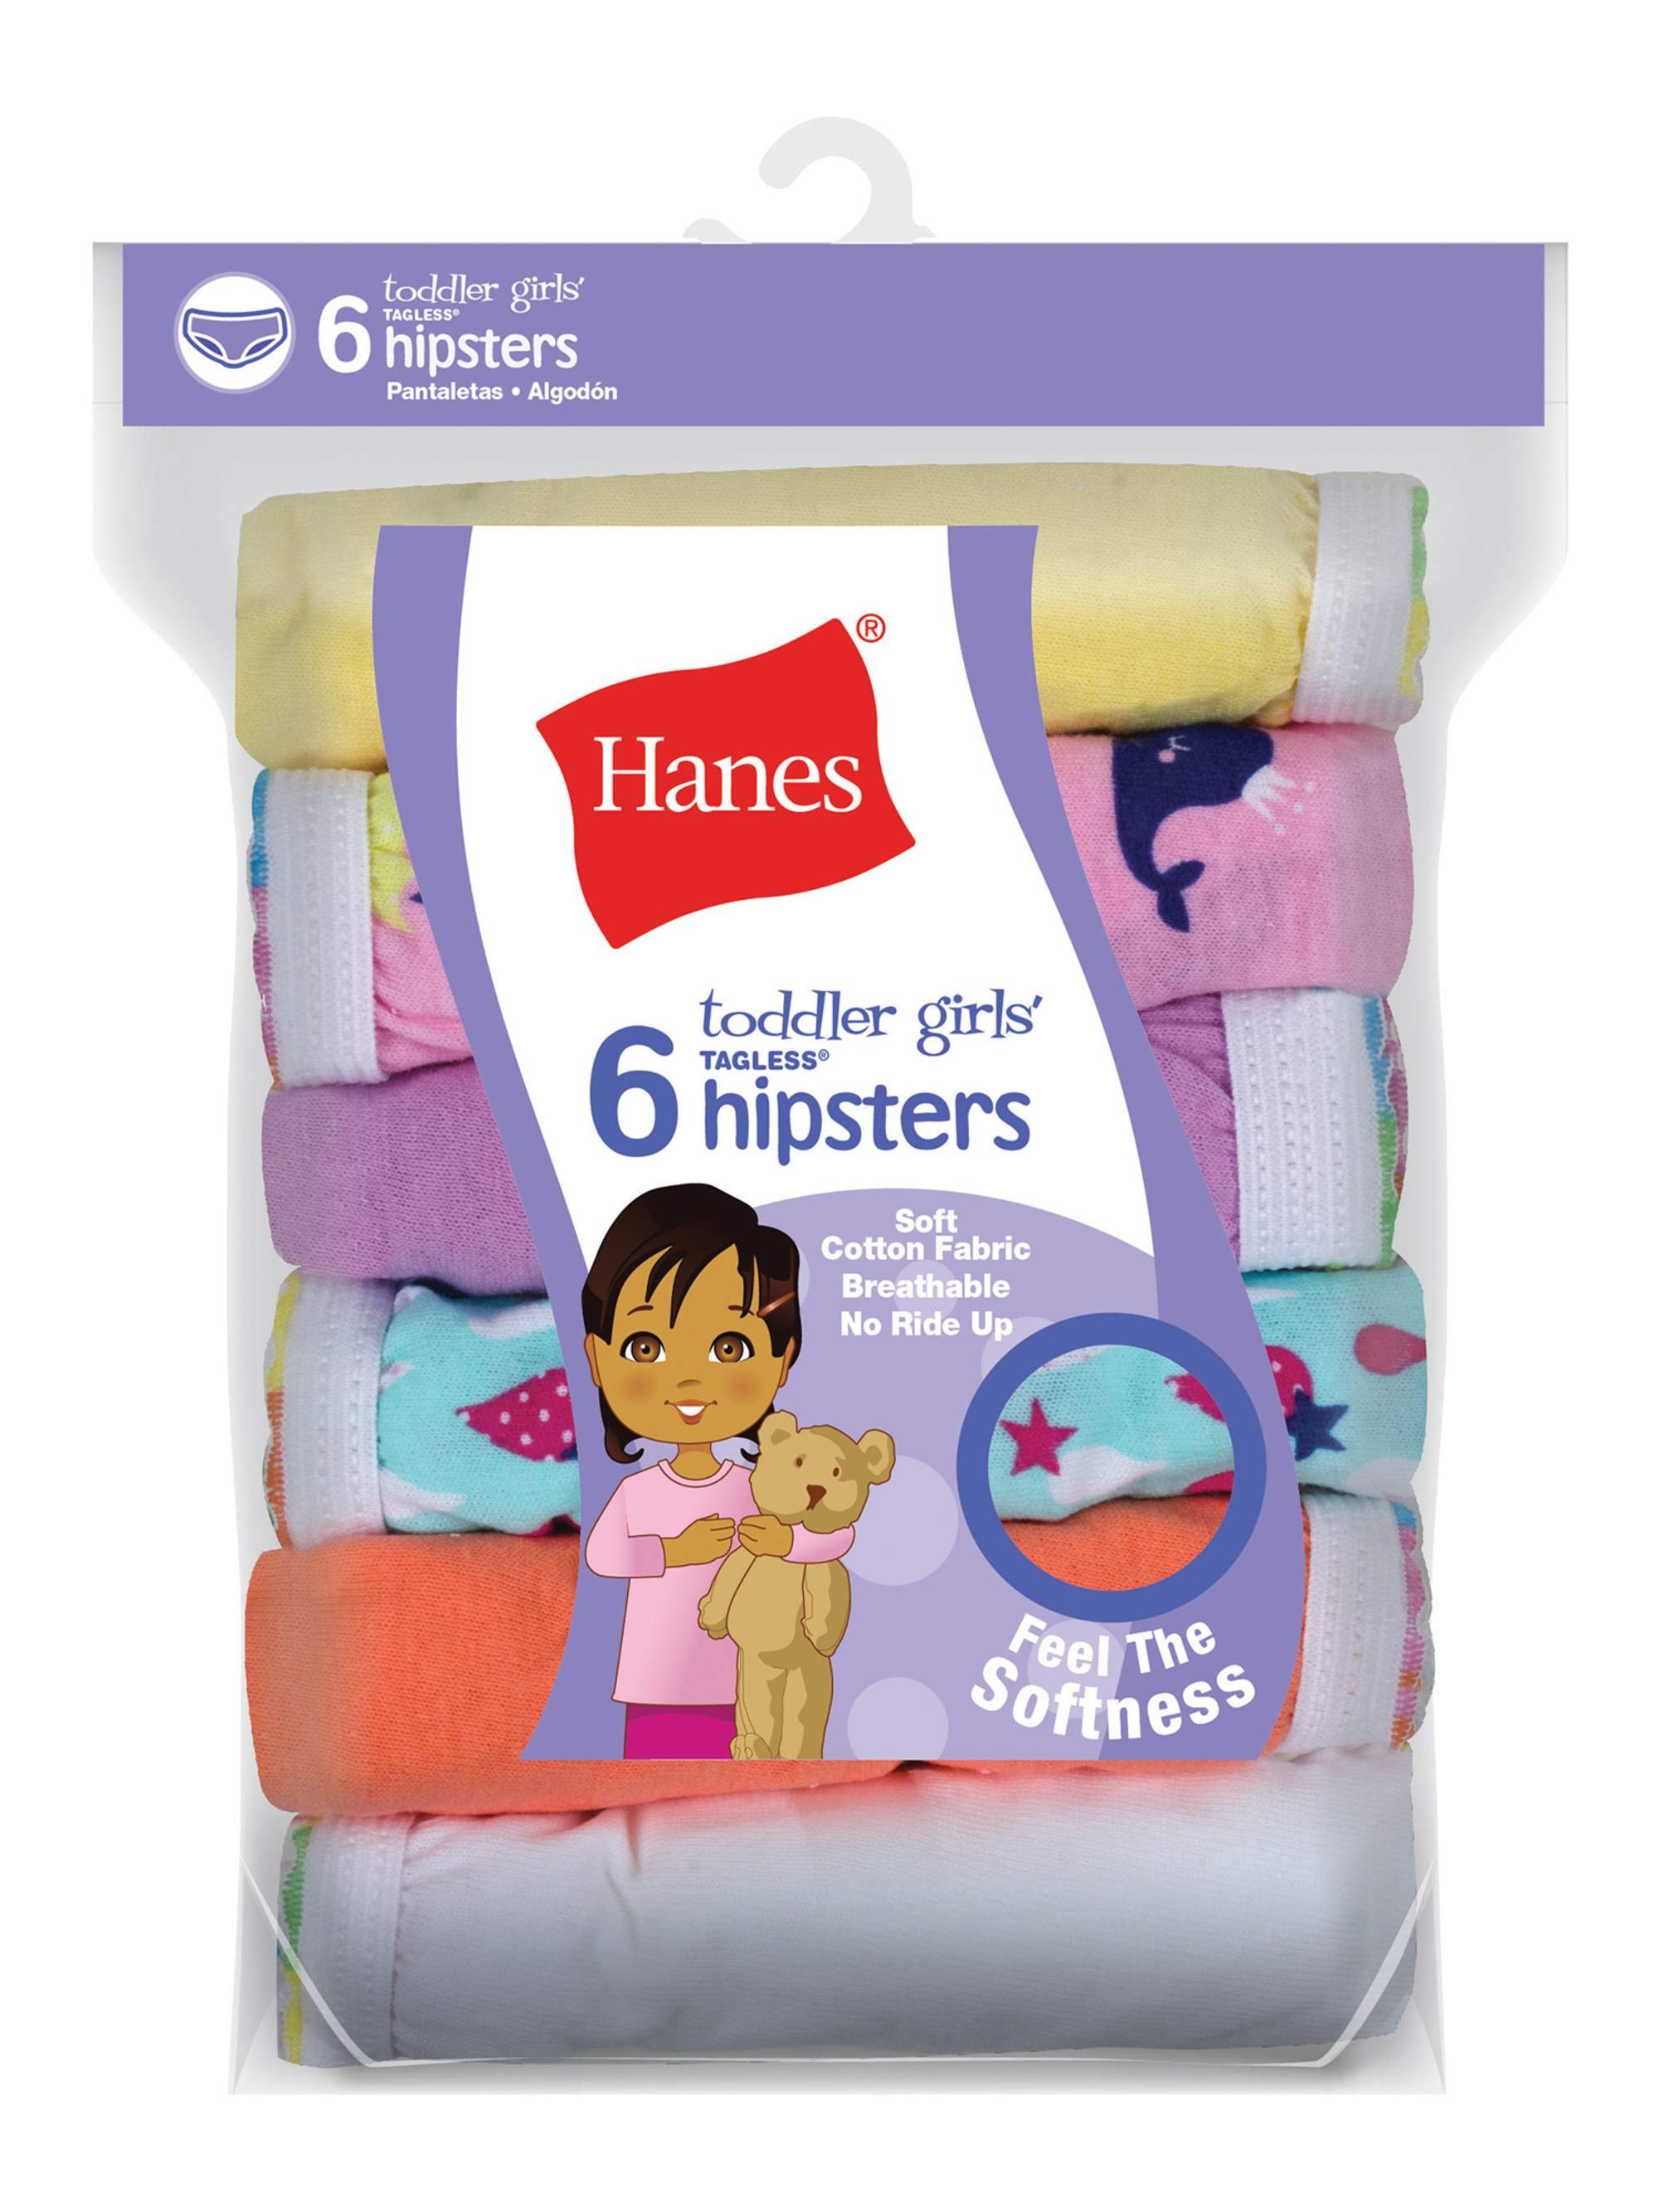 Hanes Toddler Girl Hipster Panty, 6 Pack, Sizes 2T-5T - image 3 of 4